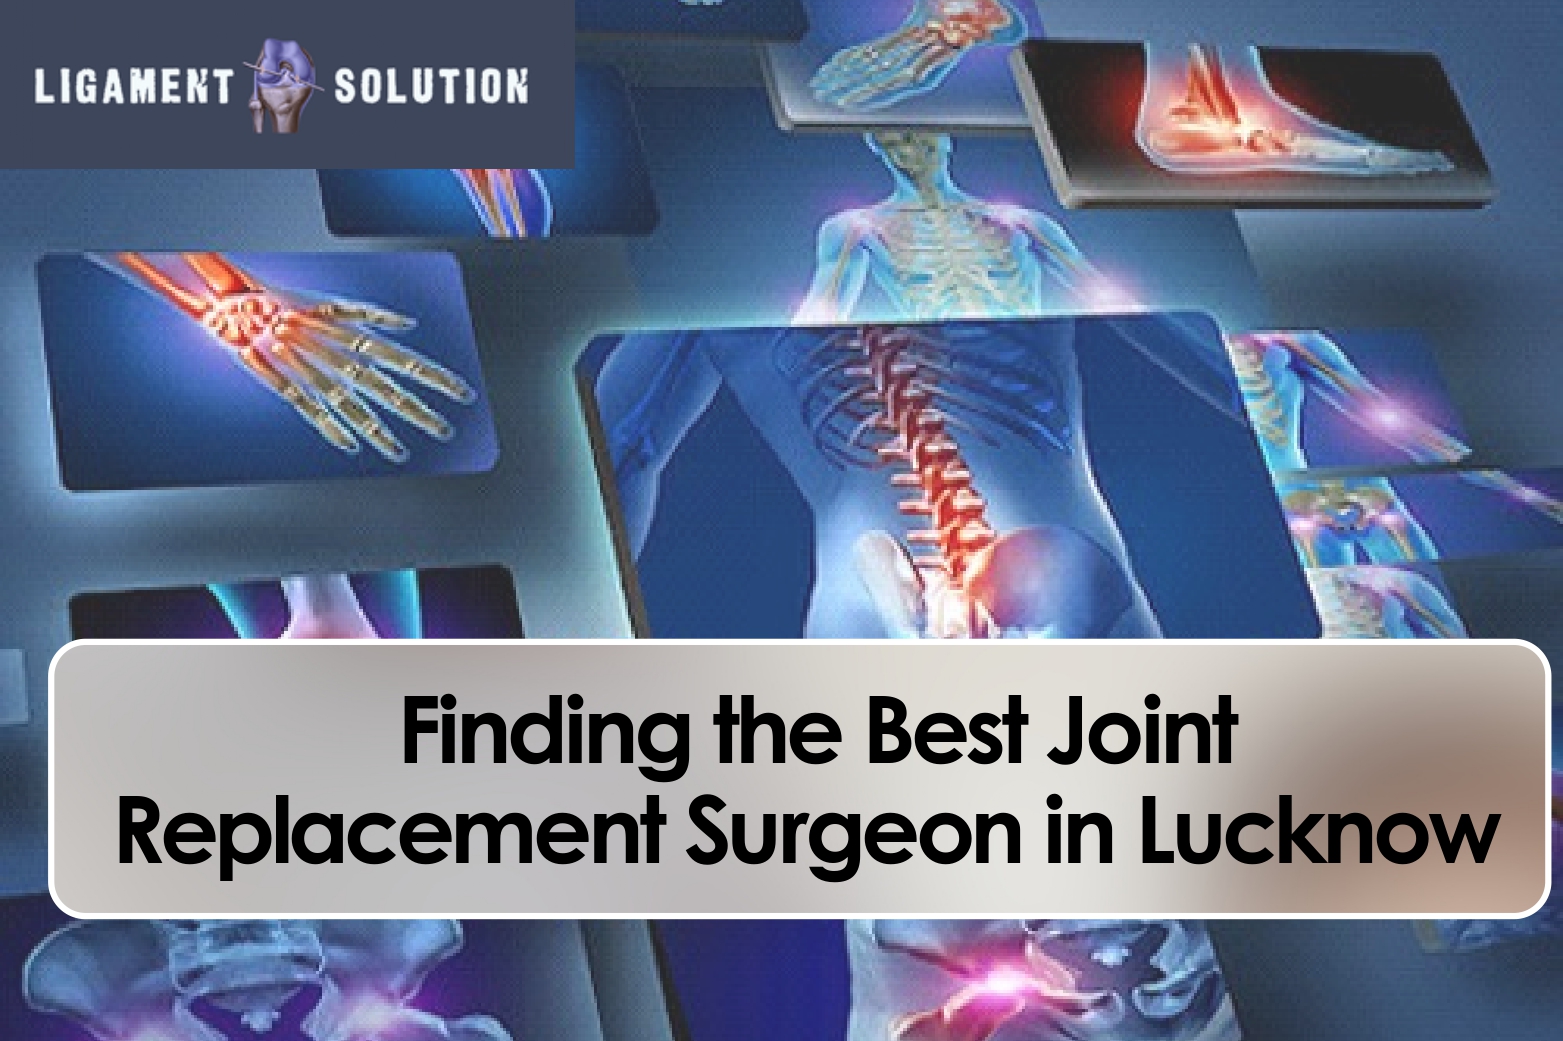 Best Joint Replacement Surgeon in Lucknow - Ligament Solution